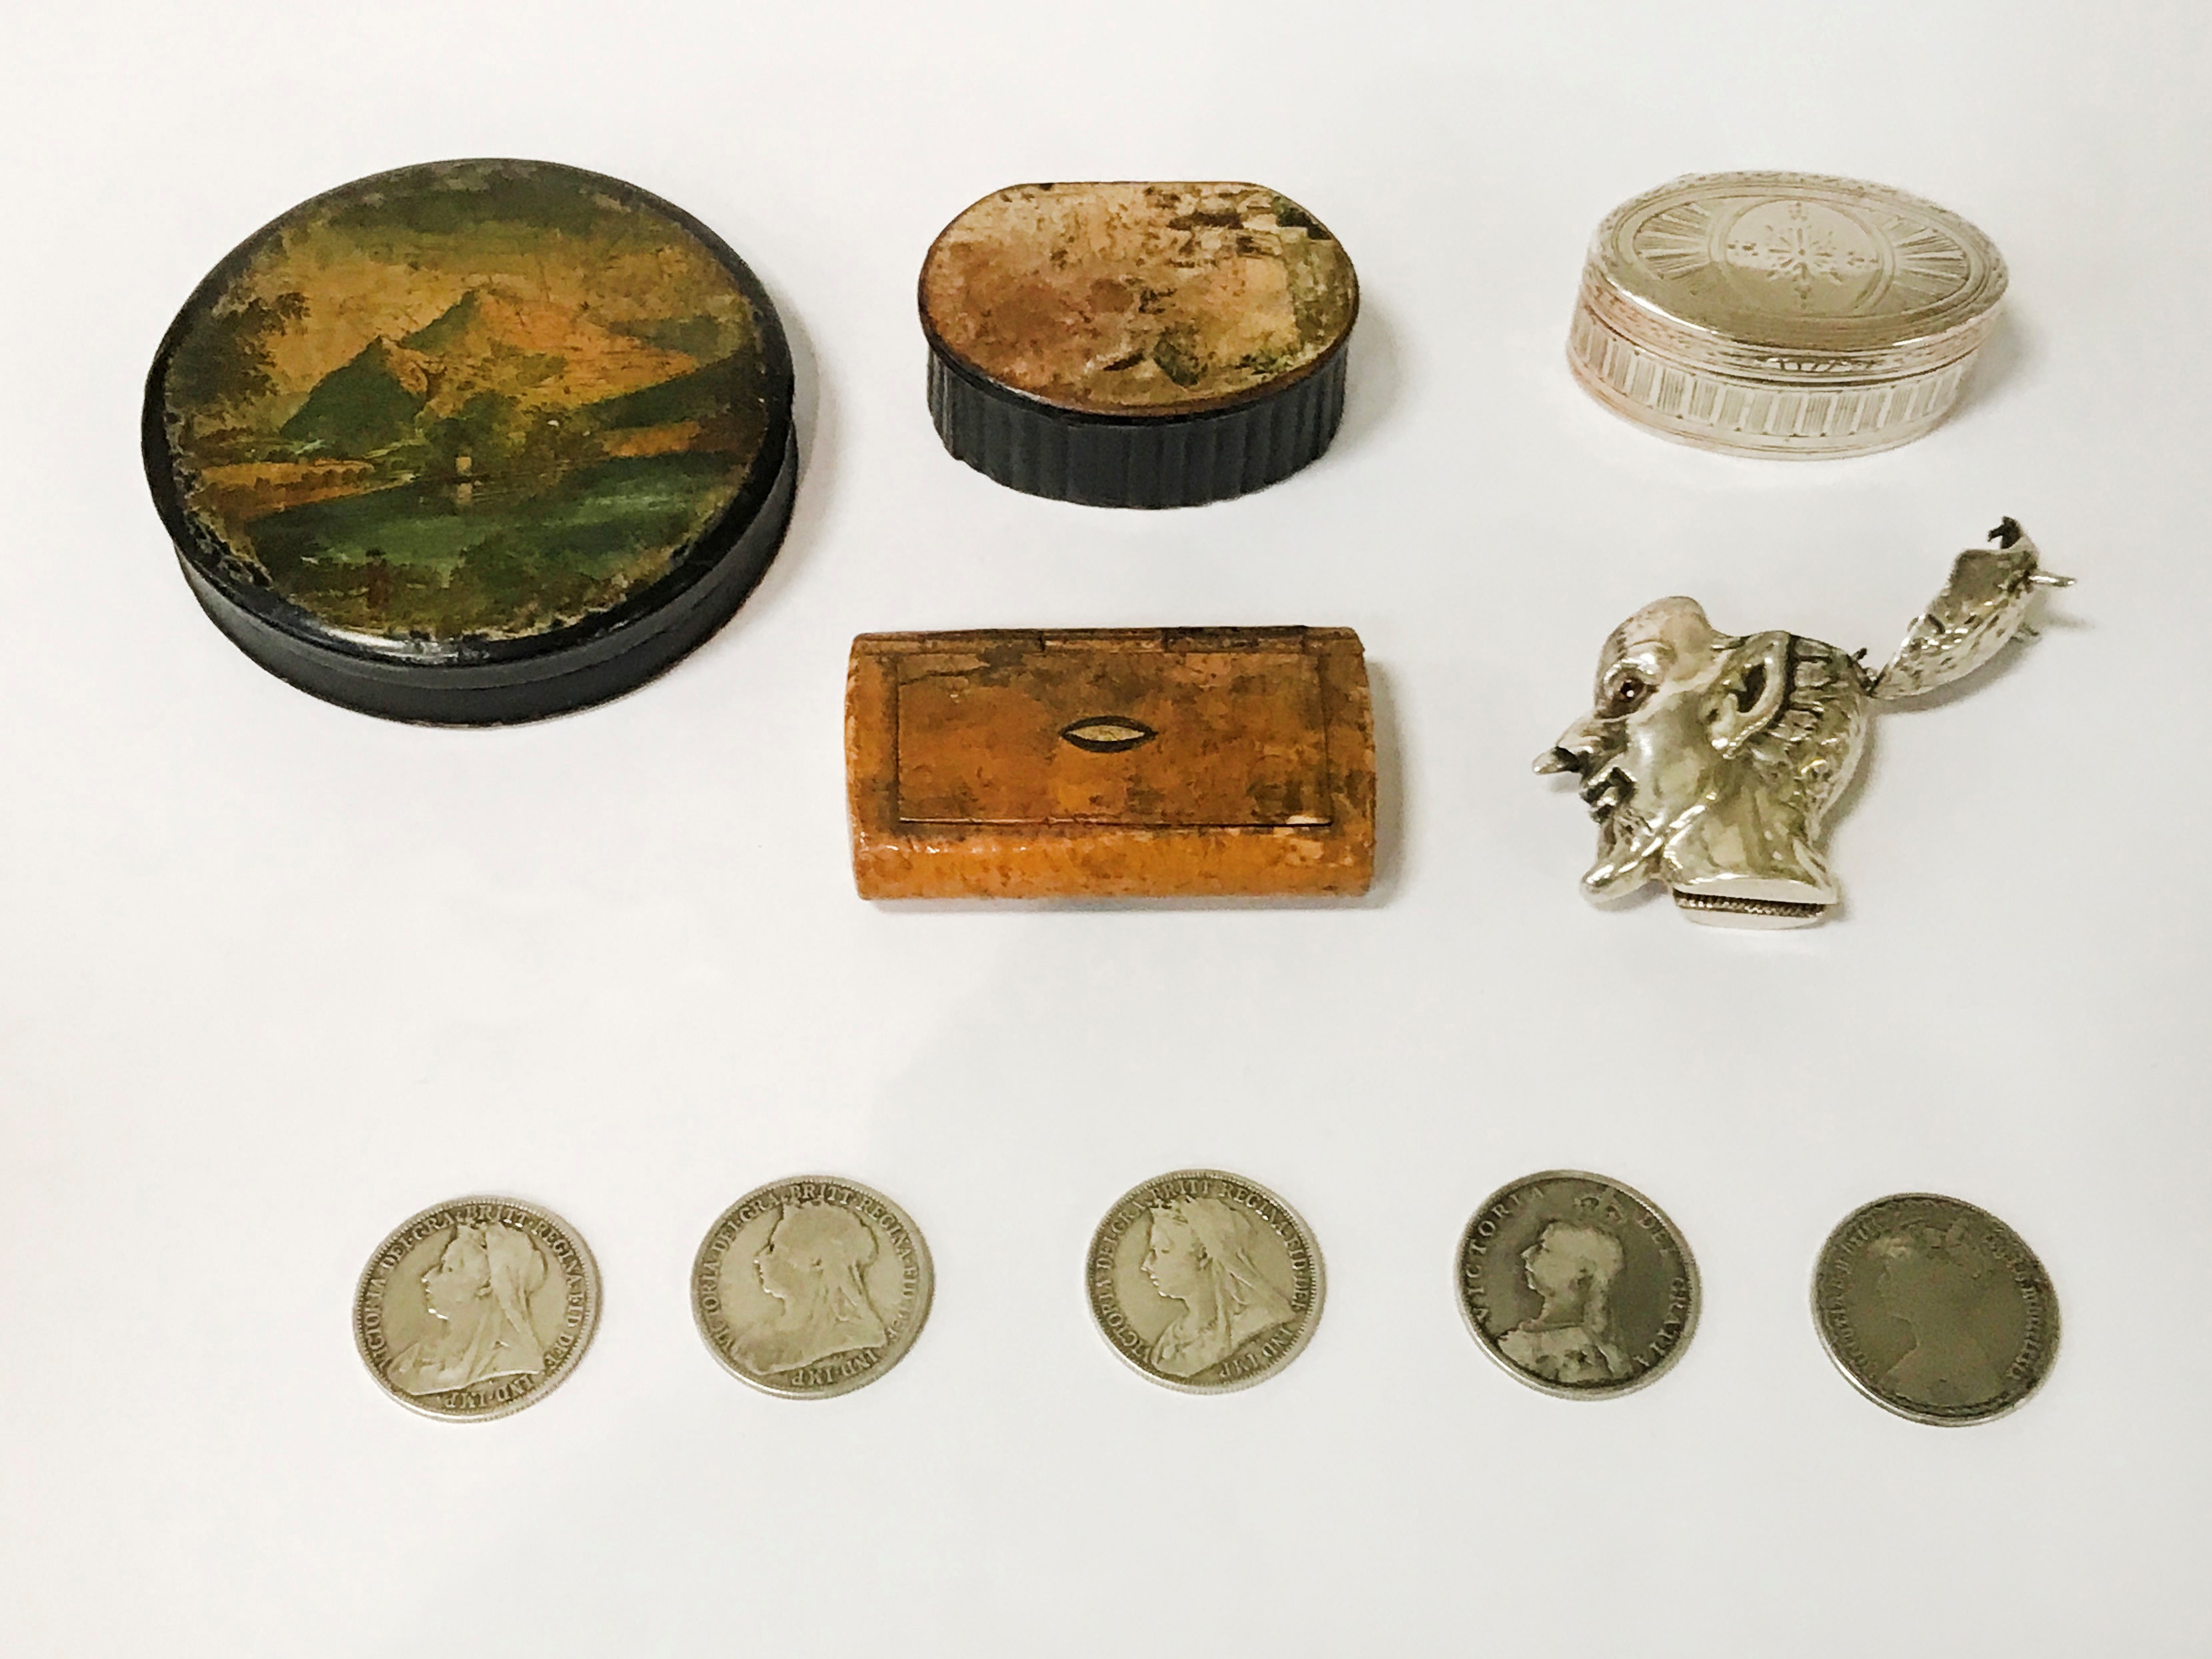 HM SILVER VESTA, THE DEVIL WITH RED EYES, 3 WOODEN SNUFF BOXES, 1 HM SILVER SNUFF BOX & 5